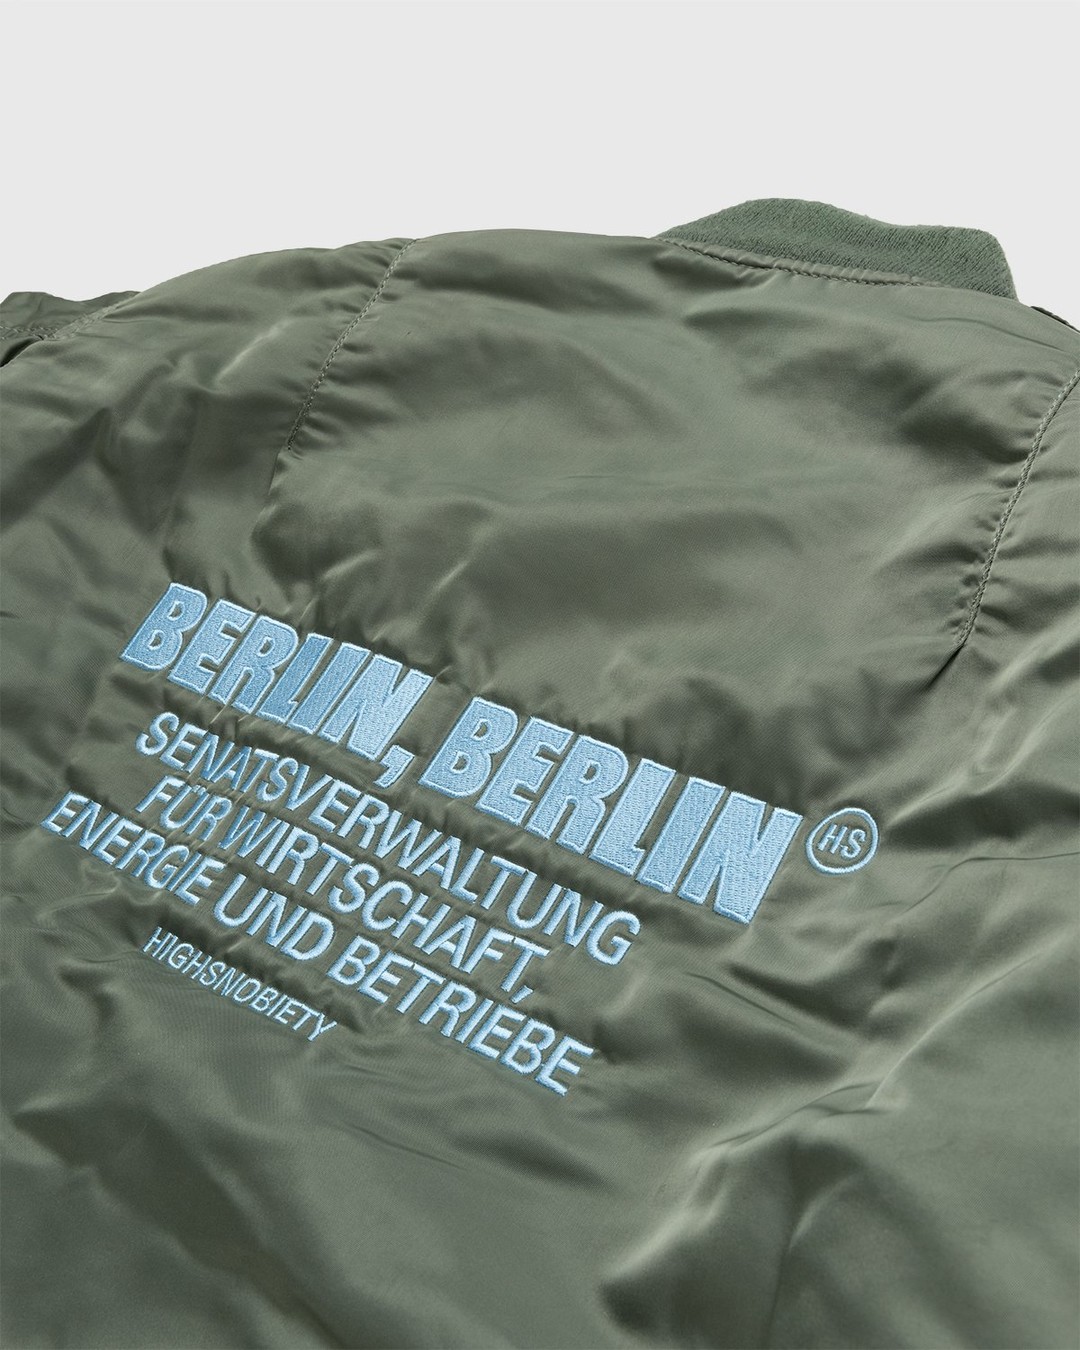 Highsnobiety – Berlin Berlin Embroidered Vintage MA-1 Green - Outerwear - Green - Image 3